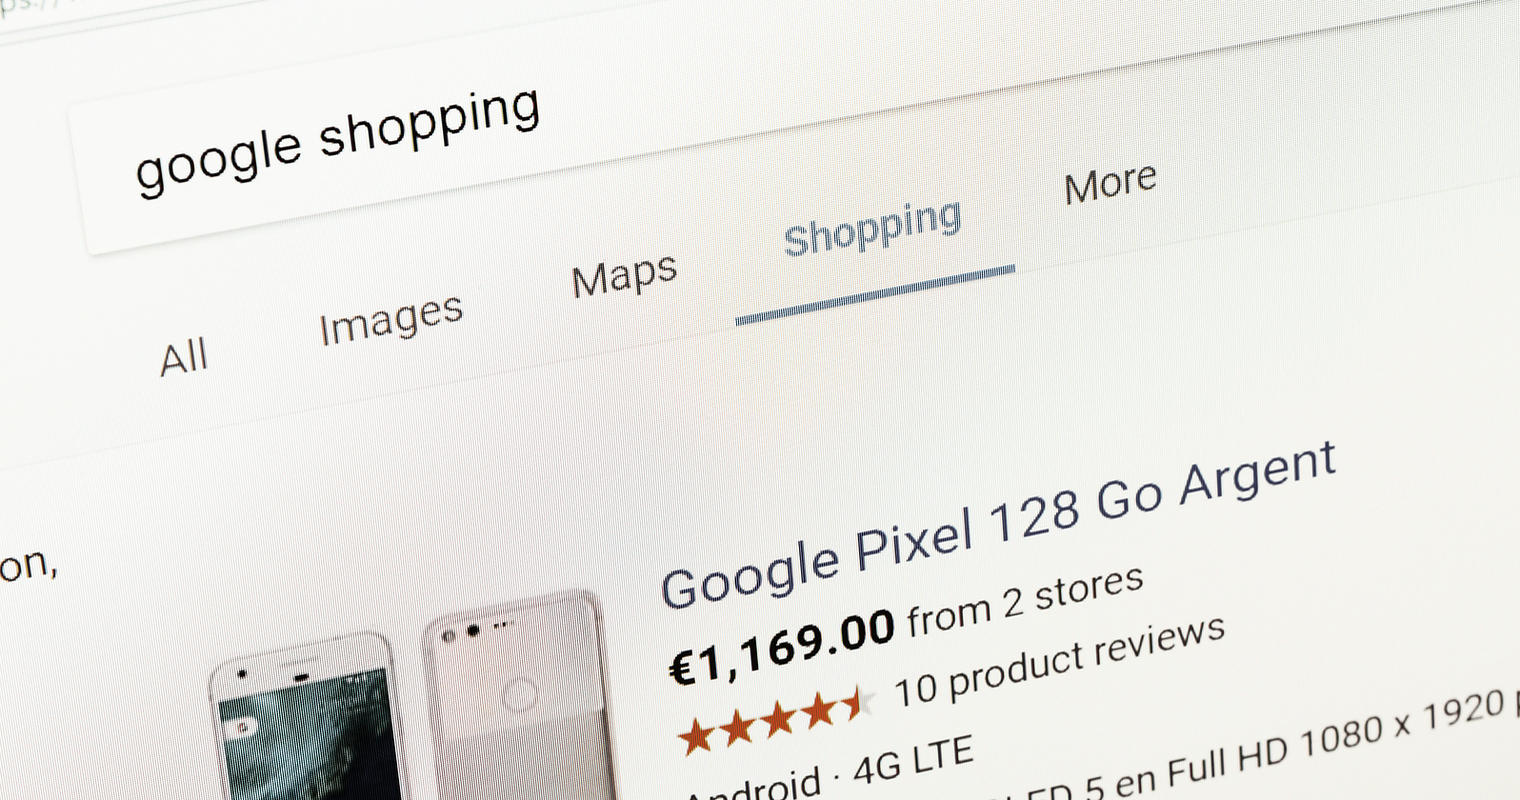 Google Shopping Ads to Automatically Appear in Google Images